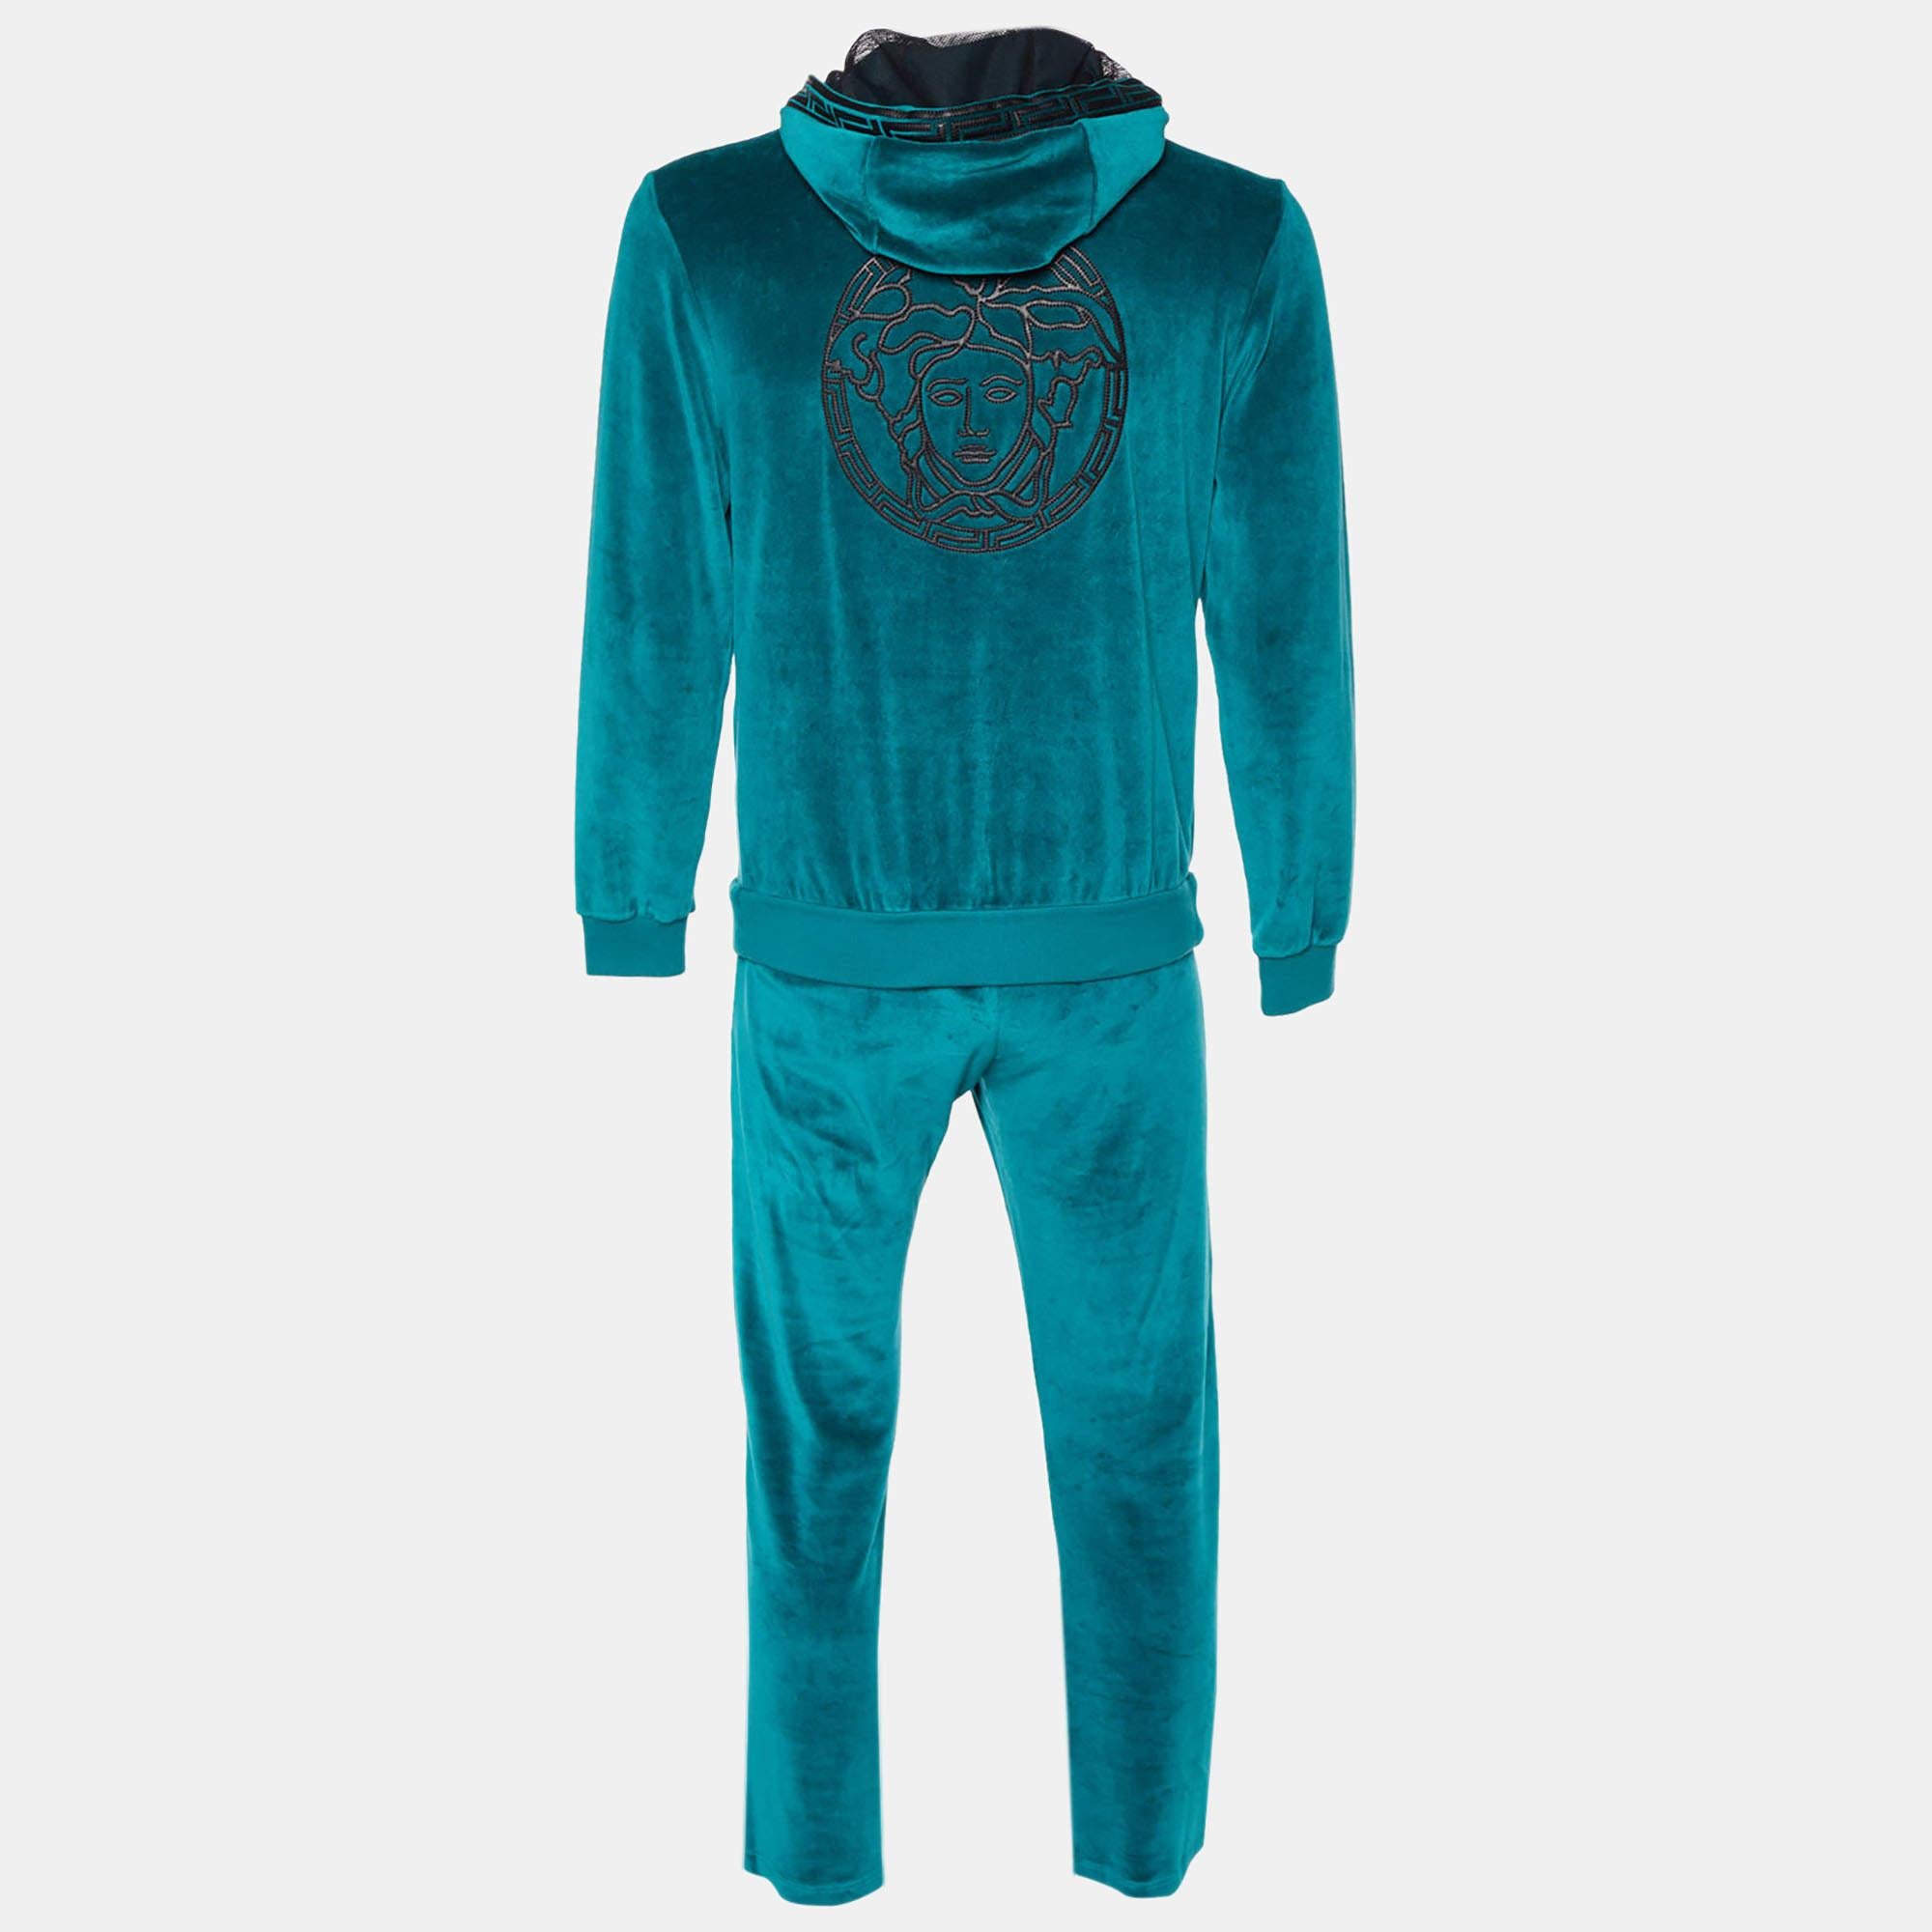 Opt for a comfortable style with this track suit from Versace. It comes in green with a long sleeve hoodie jacket and comfortable matching pants.

